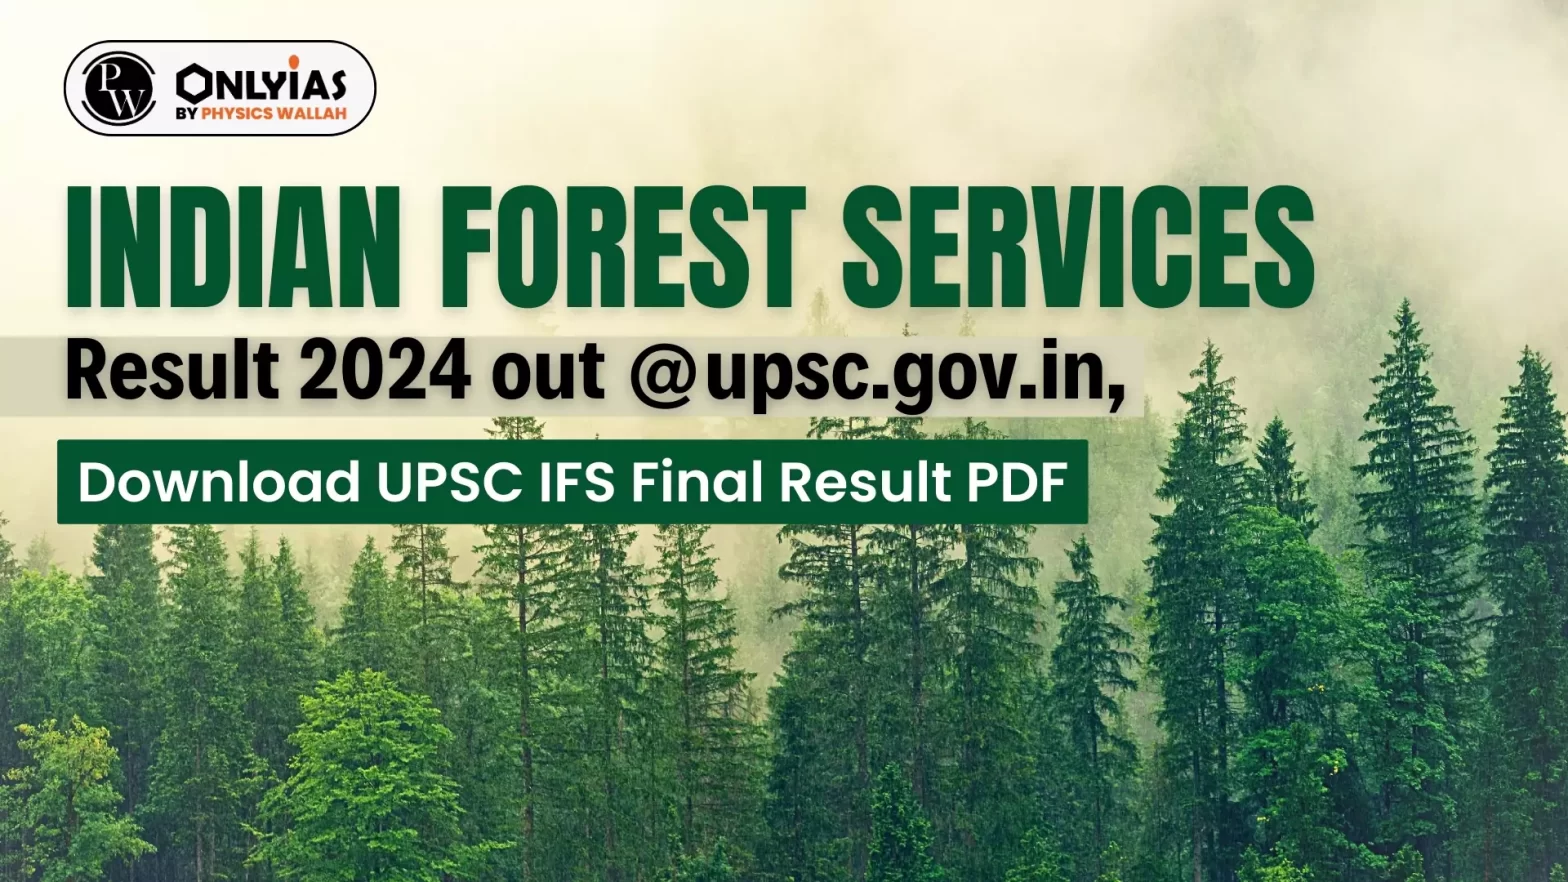 Indian Forest Services Result 2024 out @upsc.gov.in, Download UPSC IFS Final Result PDF